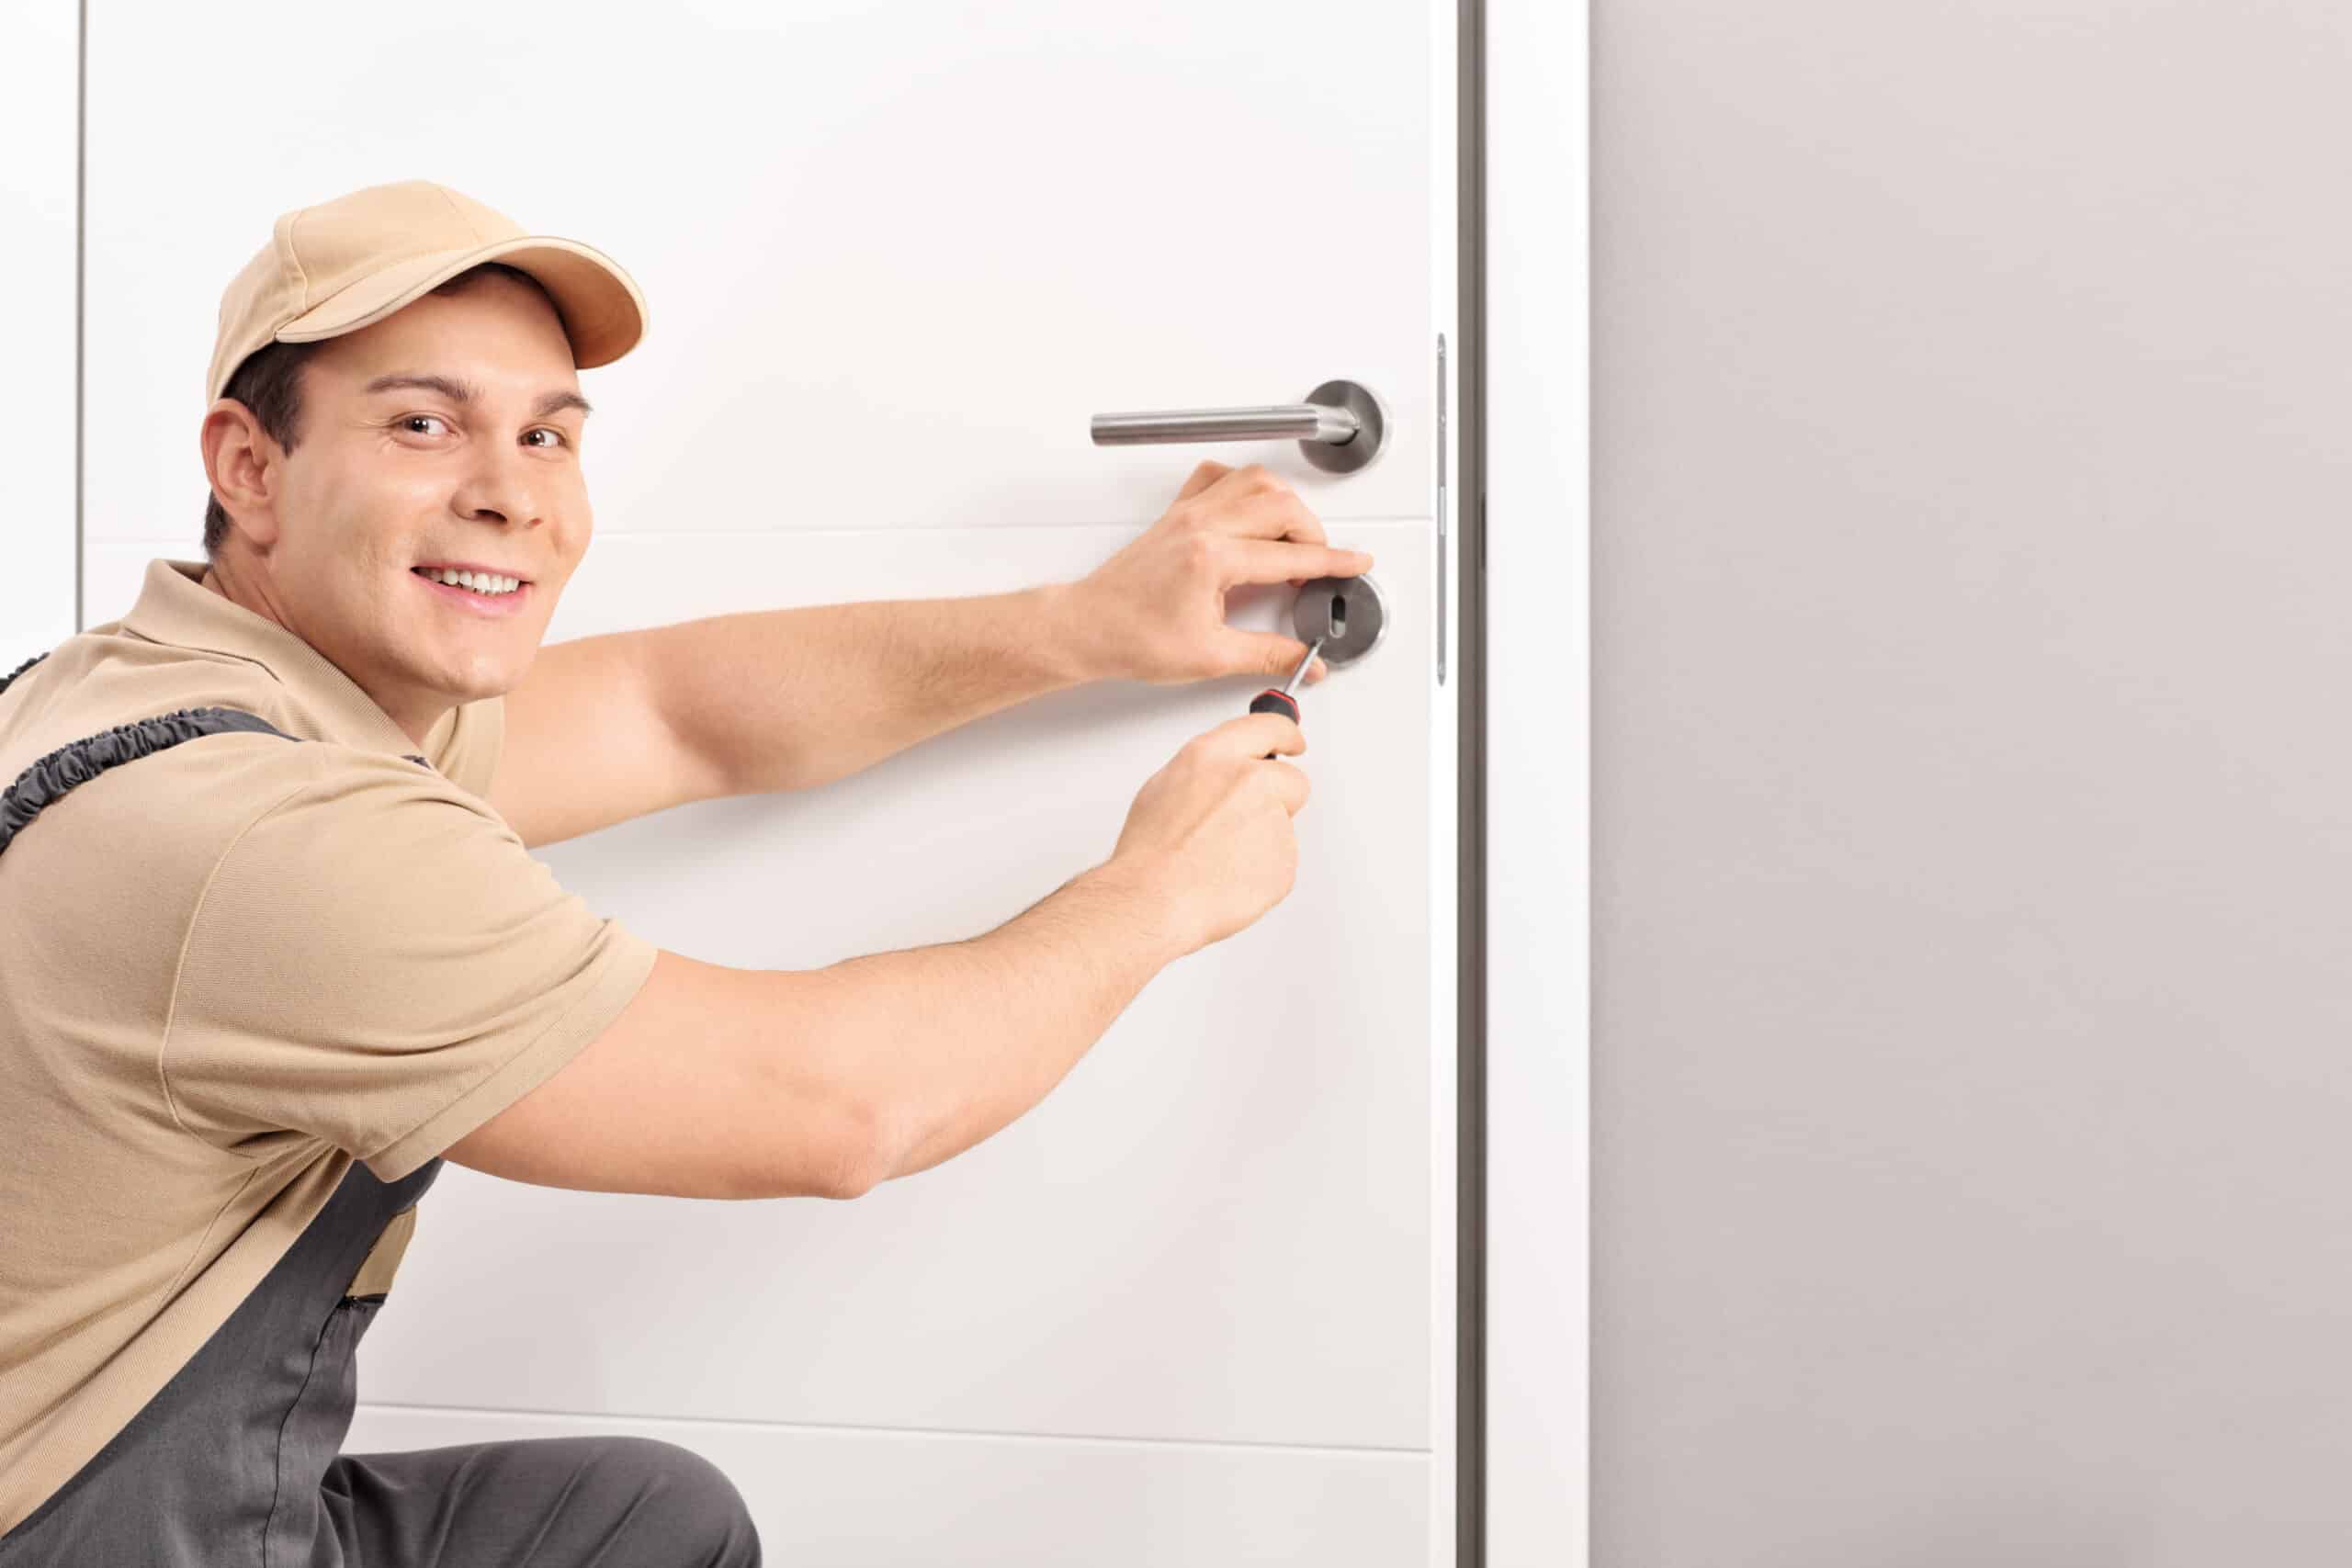 Locksmith Services Concord: What You Need to Know